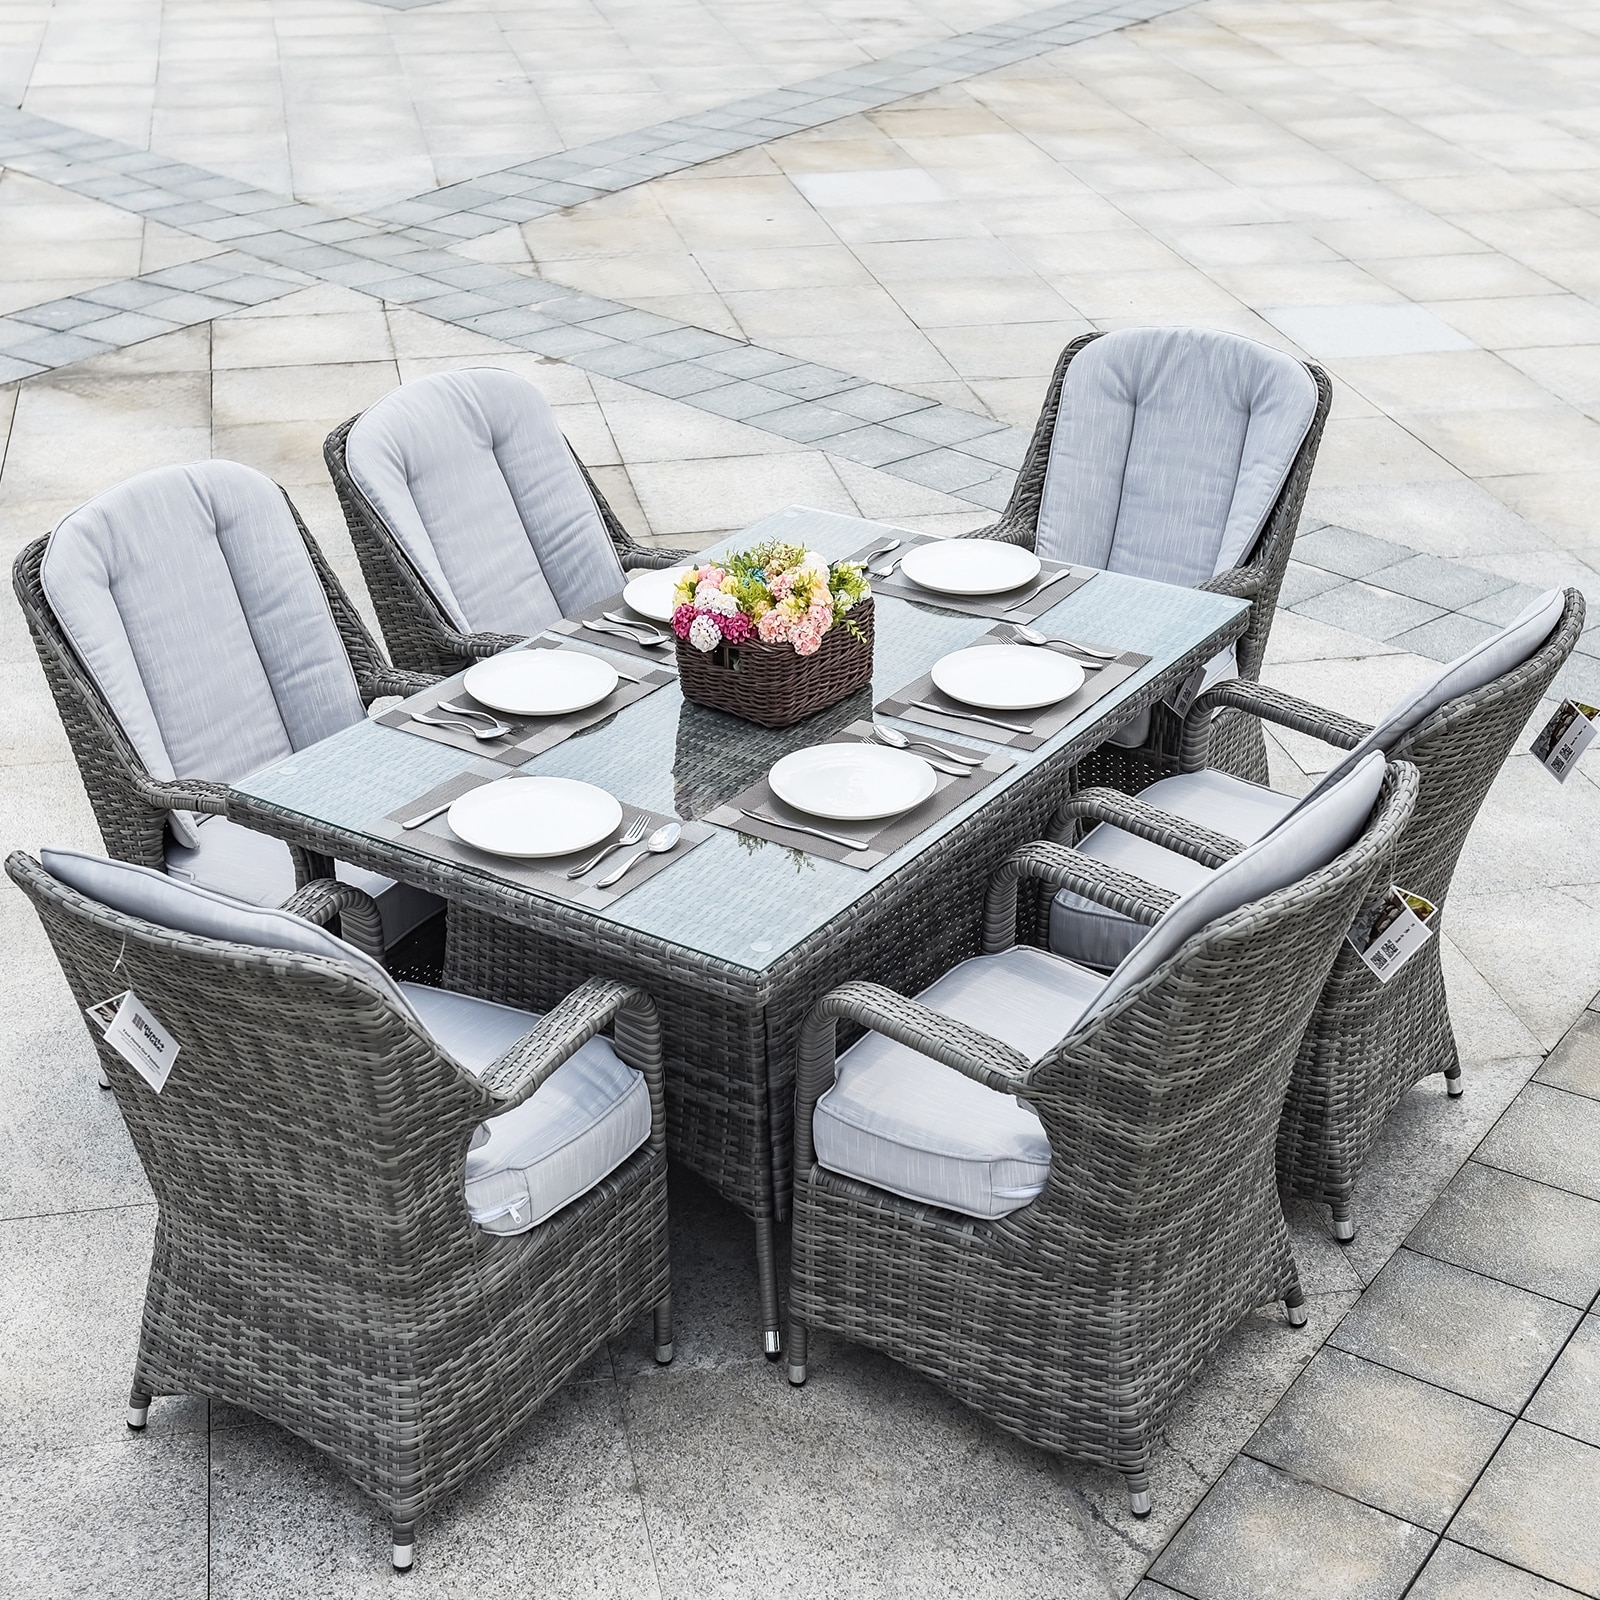 Abrihome 7-piece Outdoor Wicker Dining Table Set With 6 Eton Chairs